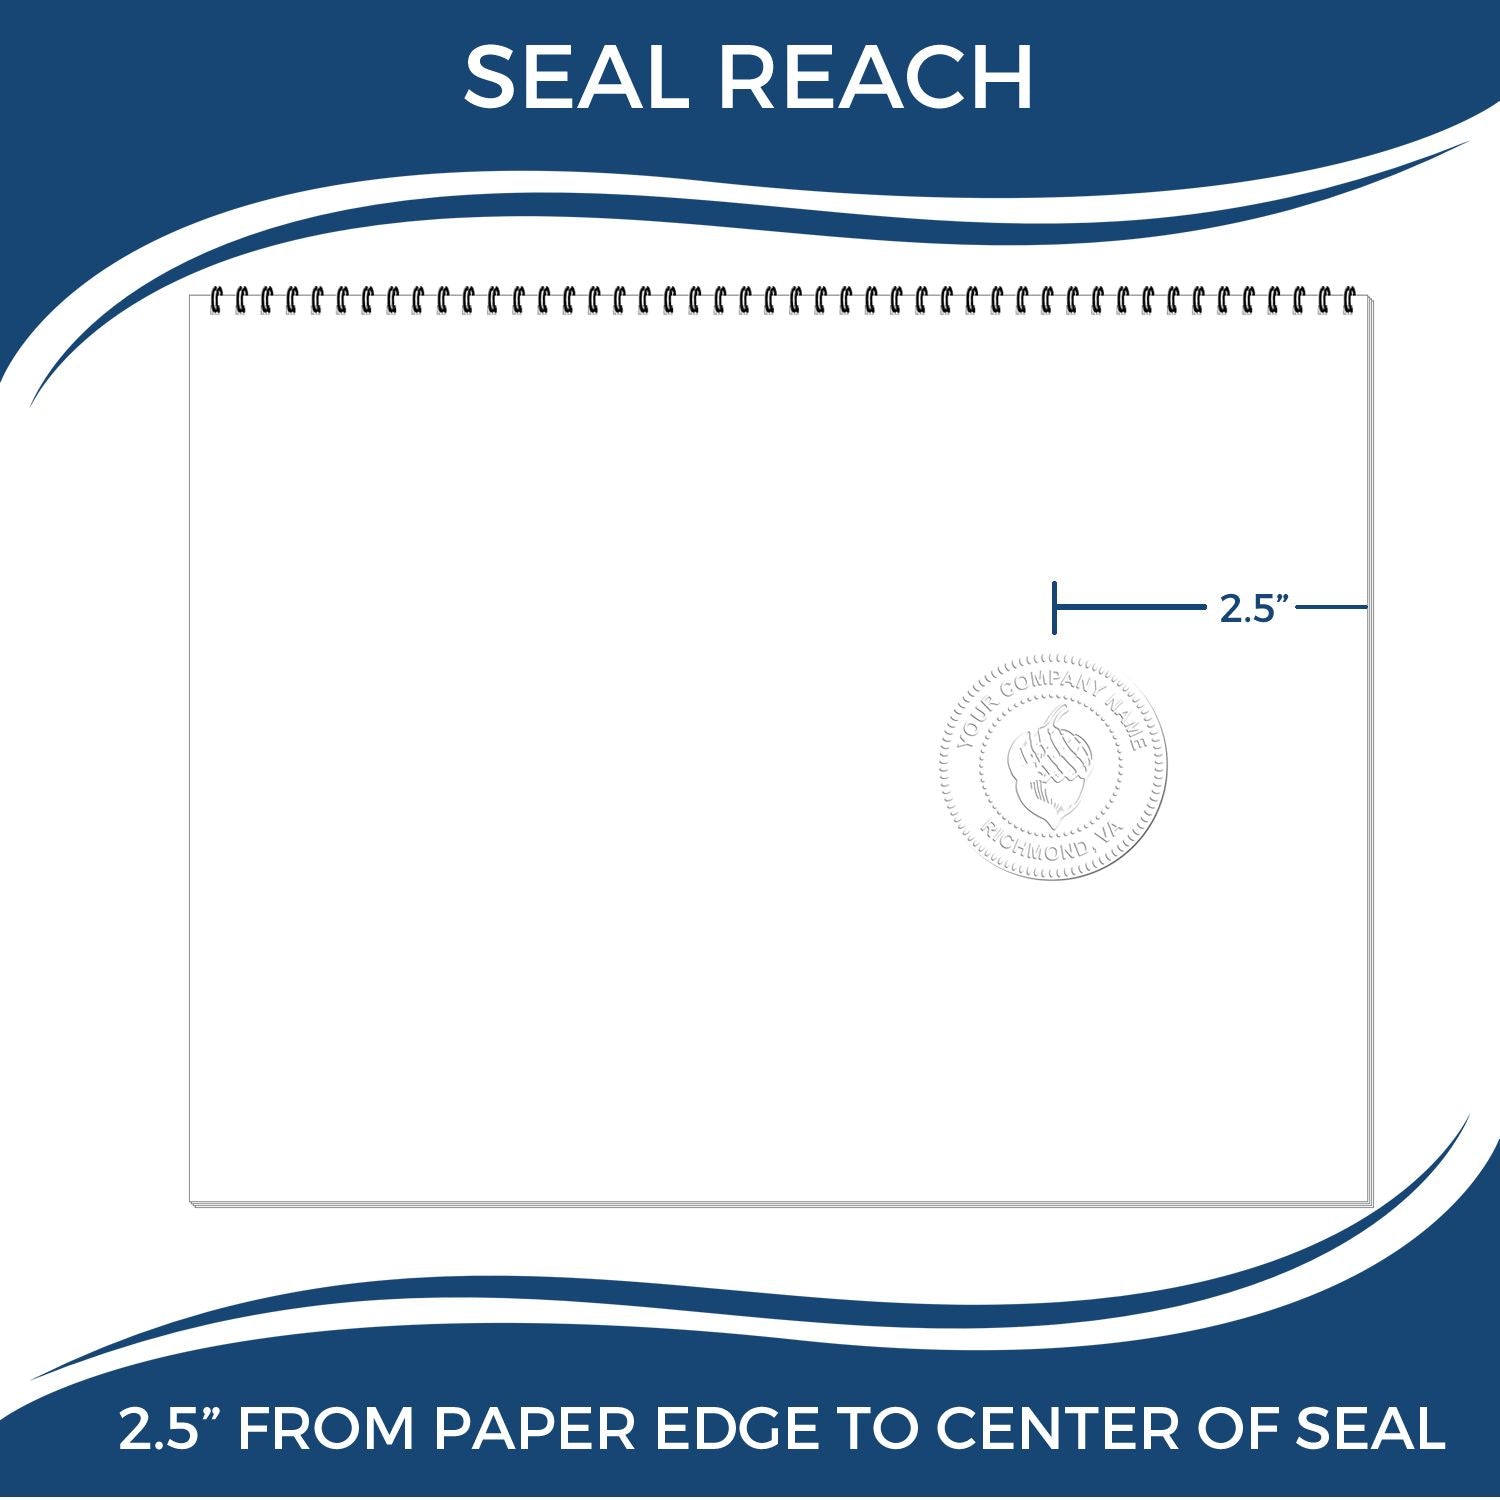 An infographic showing the seal reach which is represented by a ruler and a miniature seal image of the Long Reach New York Land Surveyor Seal